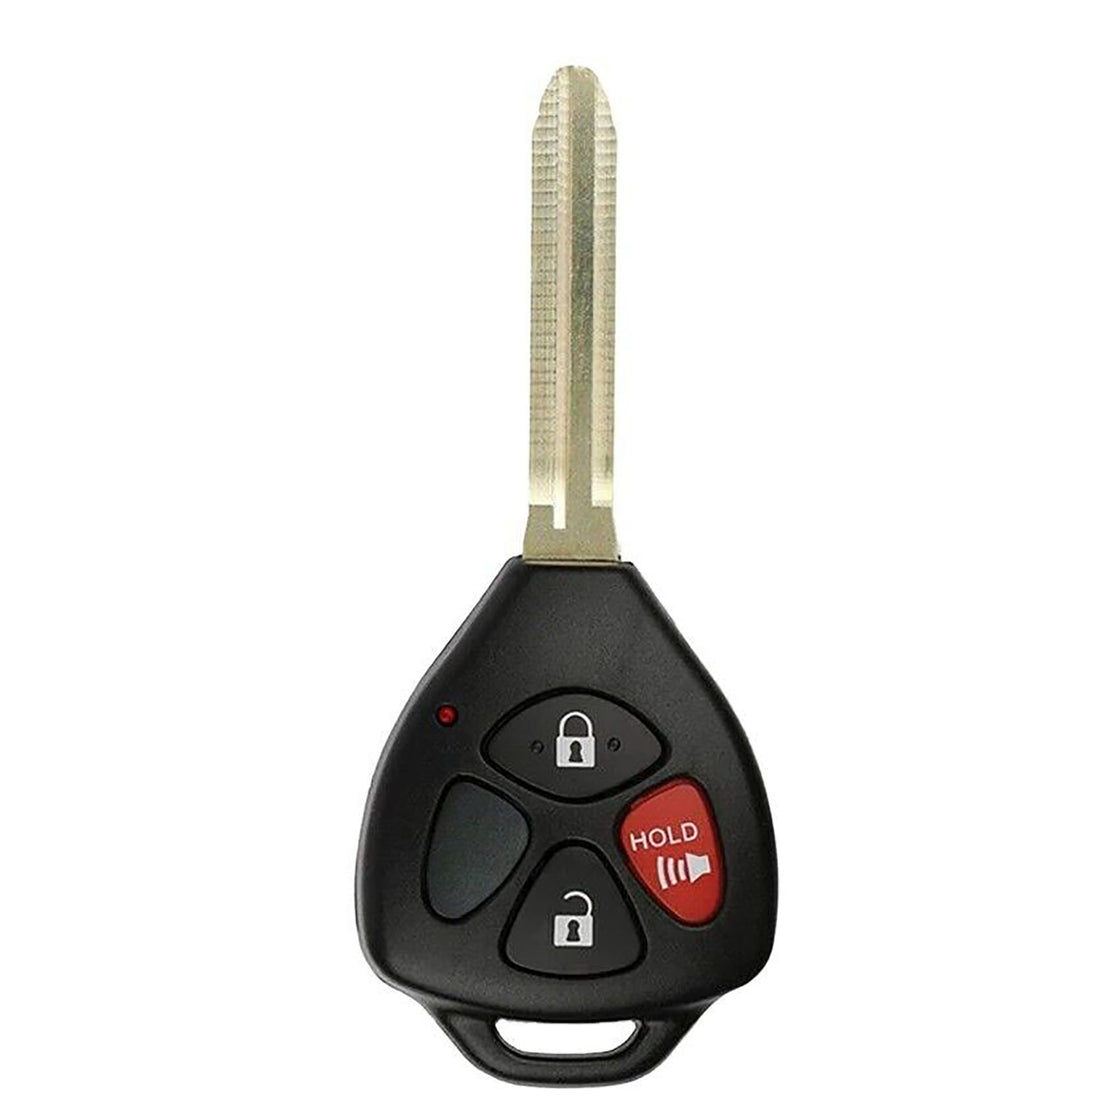 1x New Replacement Key Fob Compatible with & Fit For Toyota GQ4-29T dot Chip -Read Description - MPN GQ4-29T-06